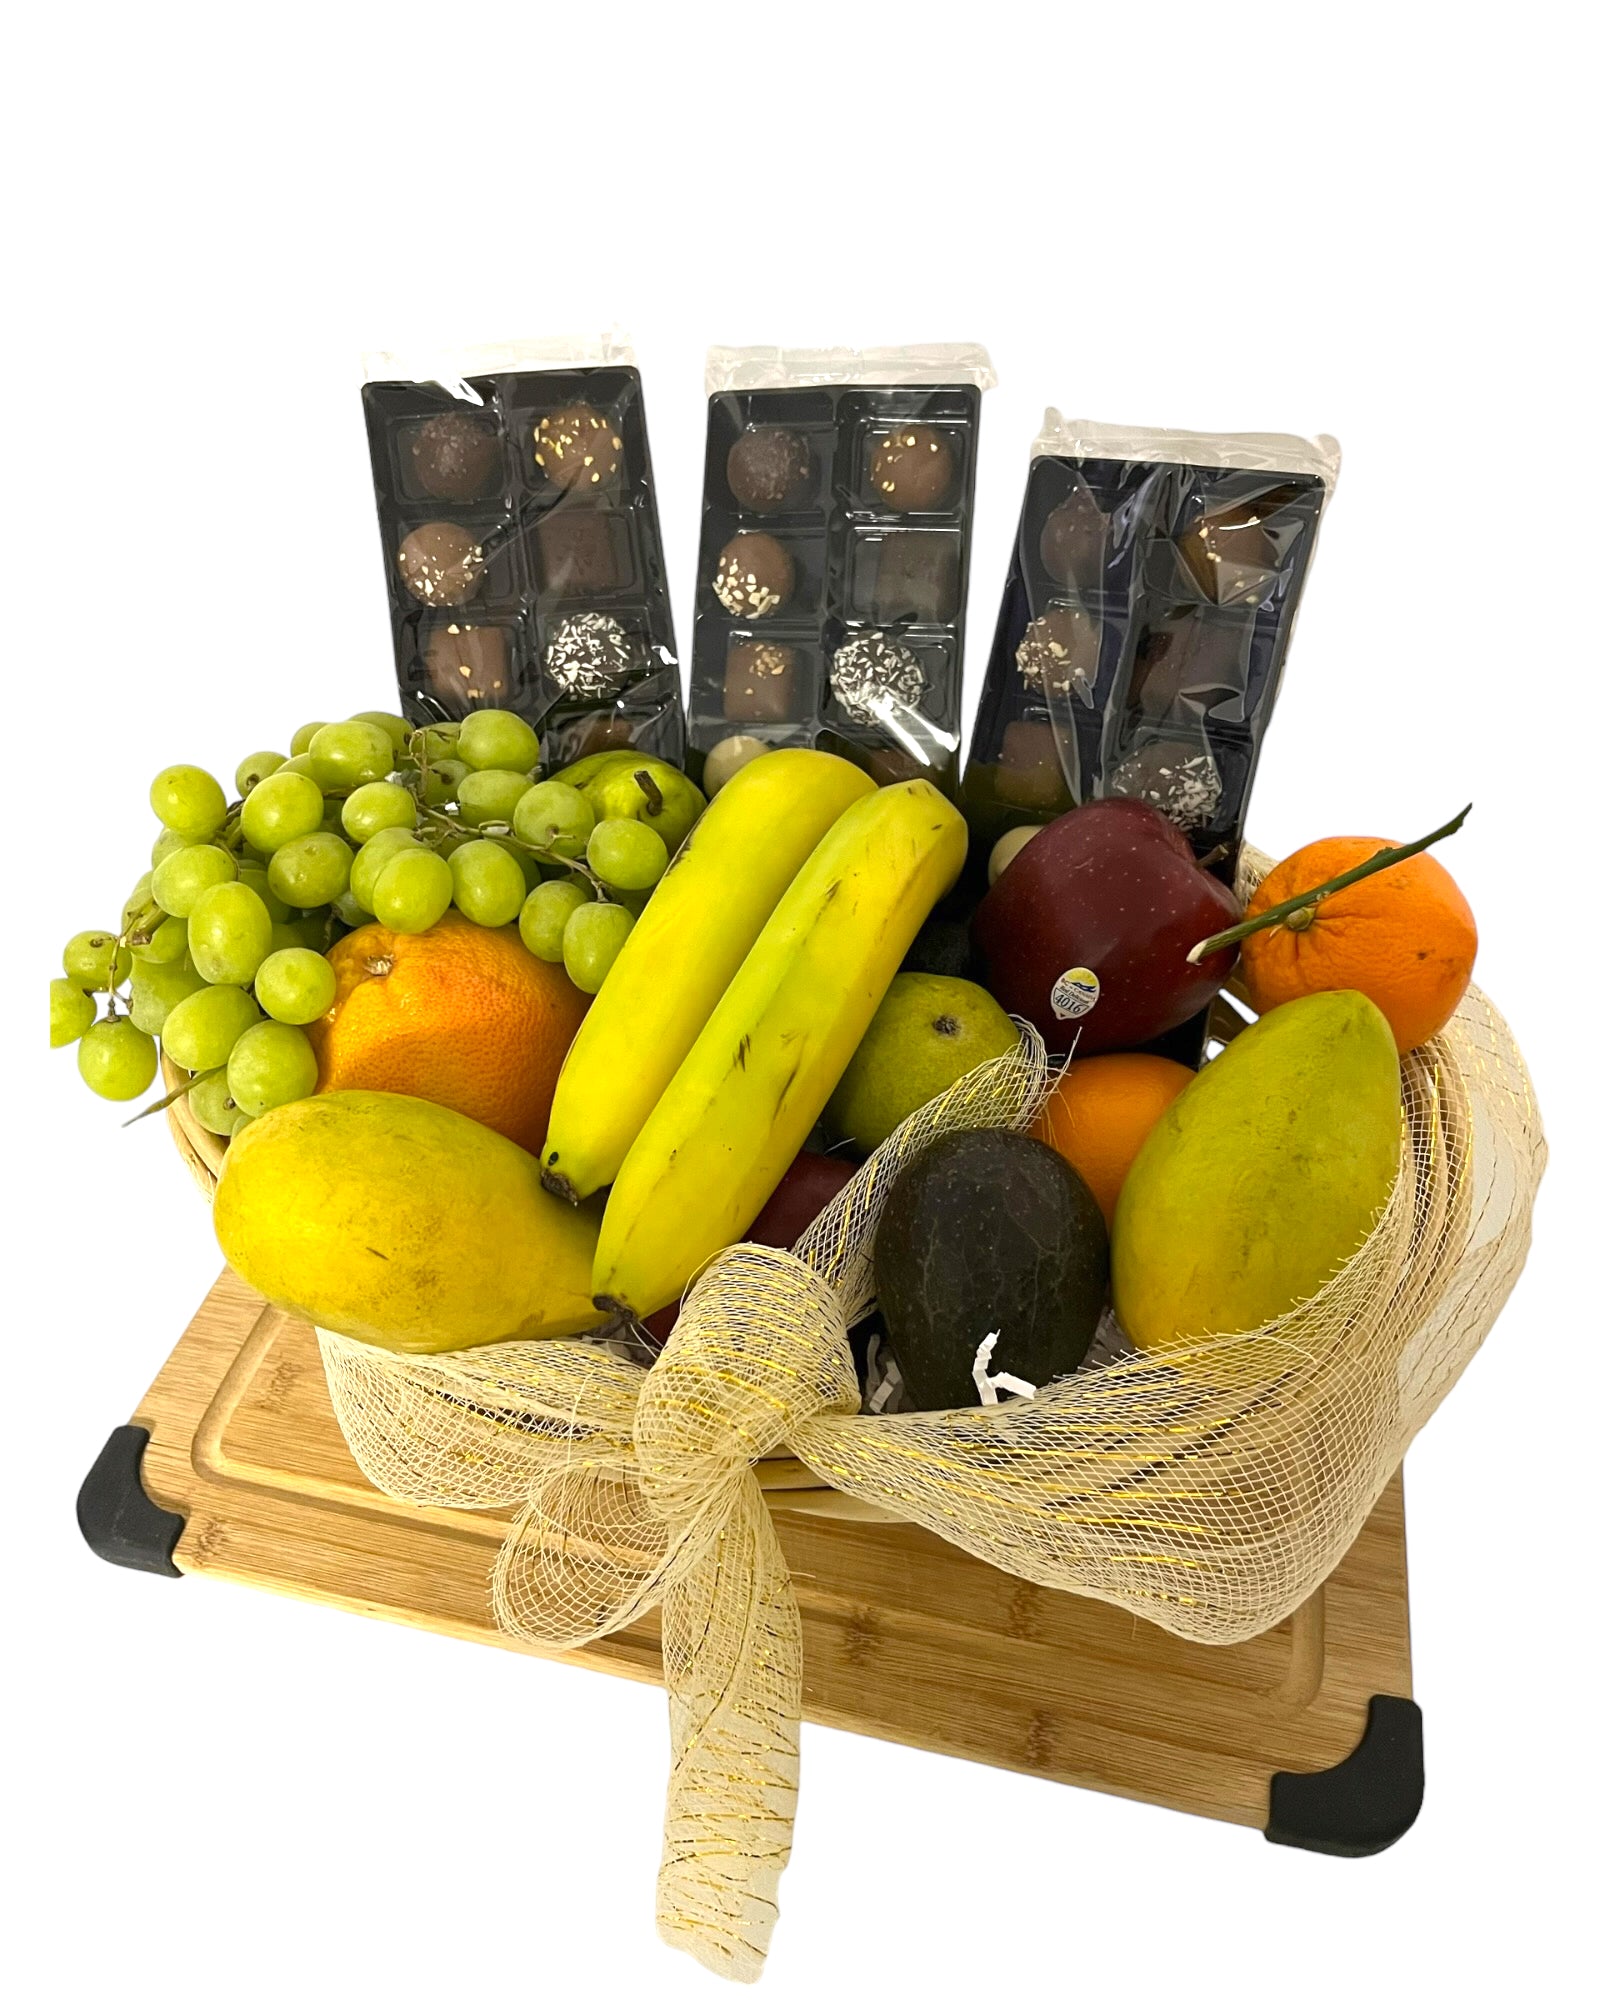 Unleash Your Sweet Side with our Irresistible Fruit A LA Chocolate Basket